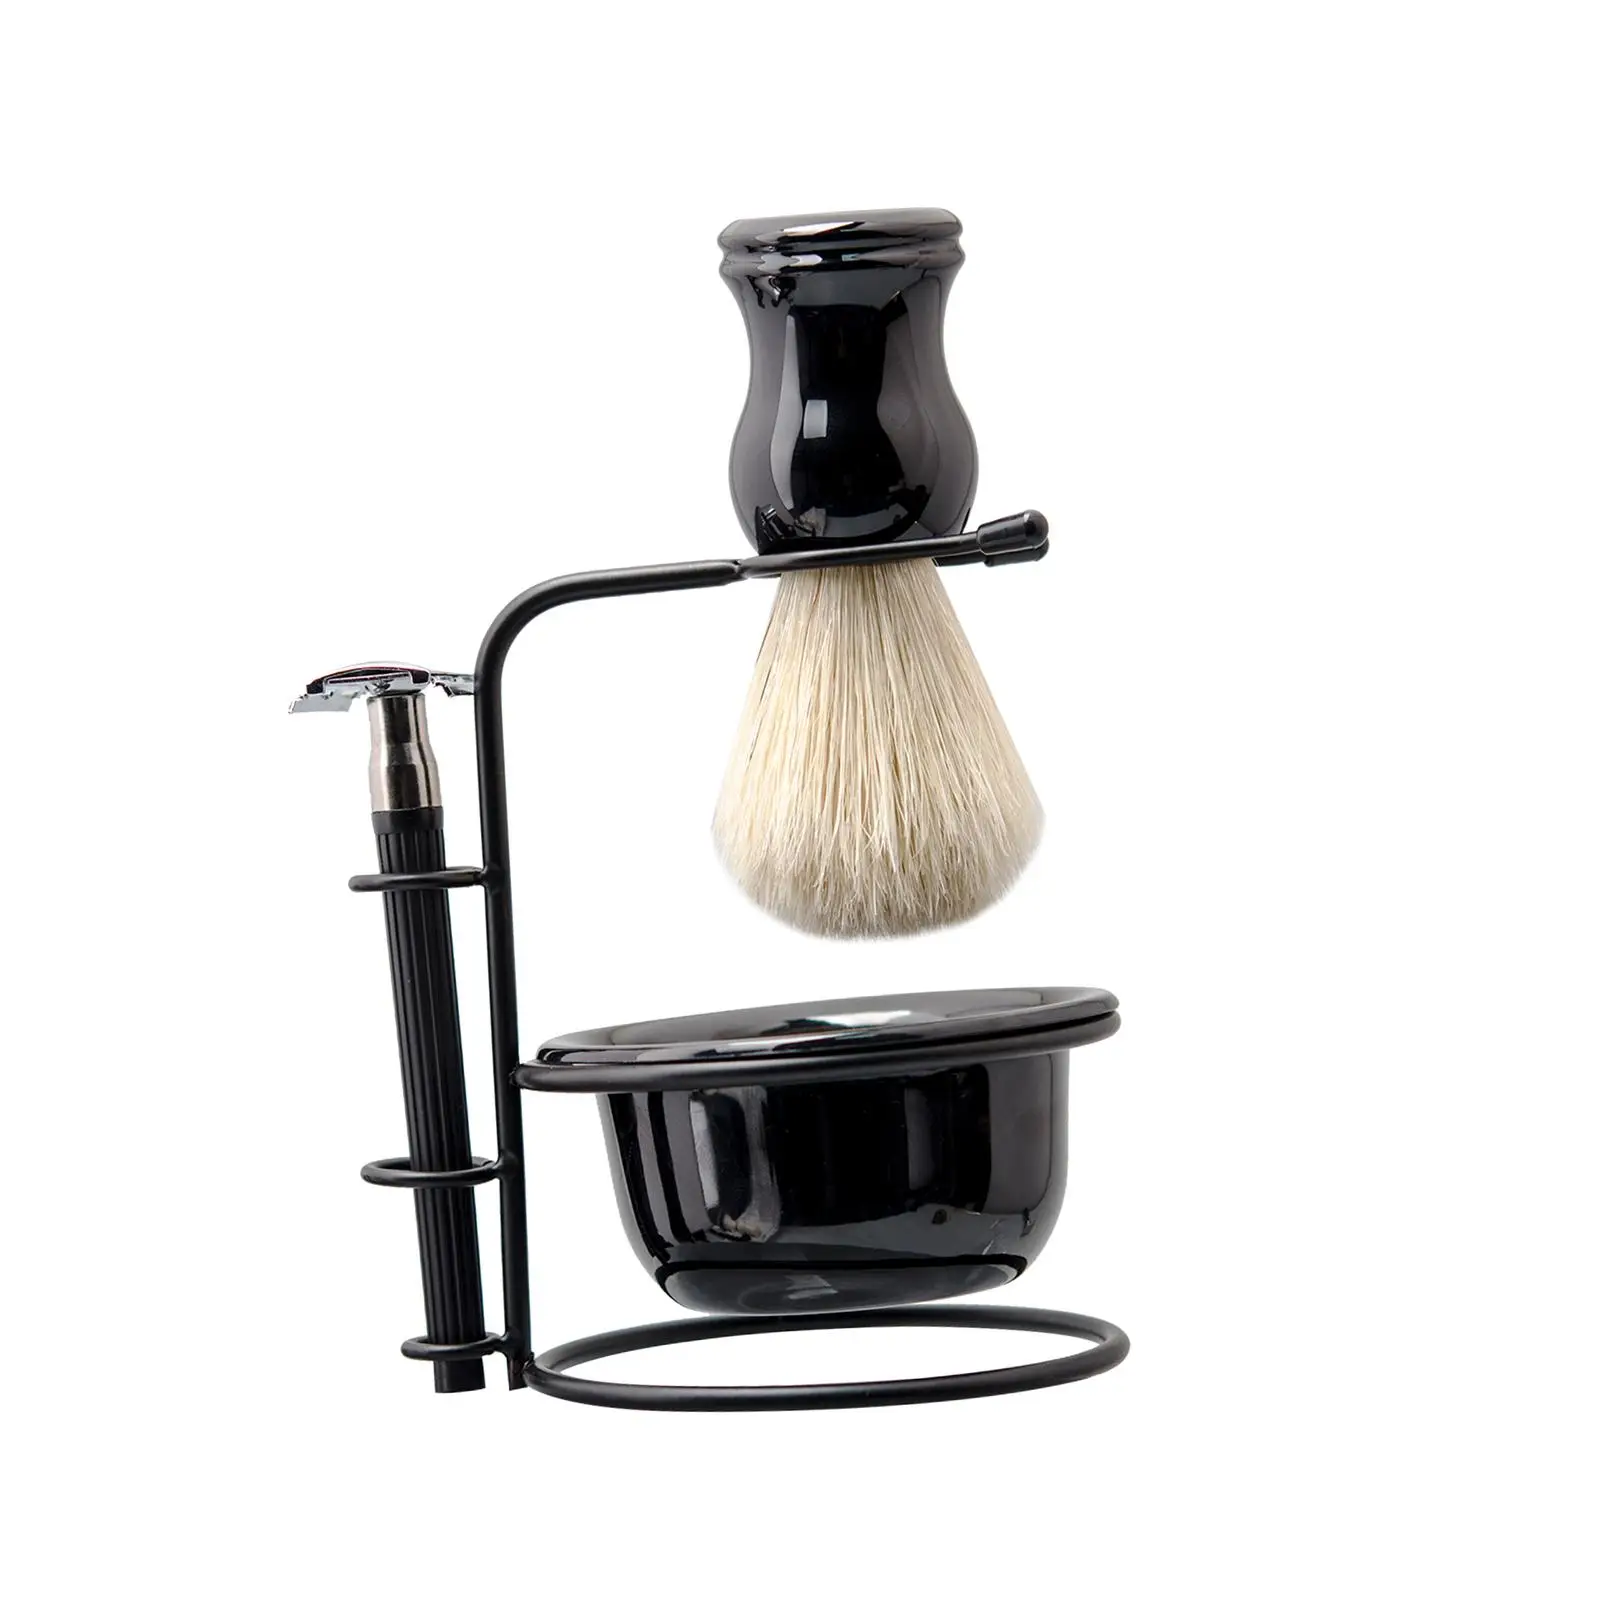 4 in 1 Shaving Set Sturdy Shaving Brush Stand Kit Perfect for Every Day Use